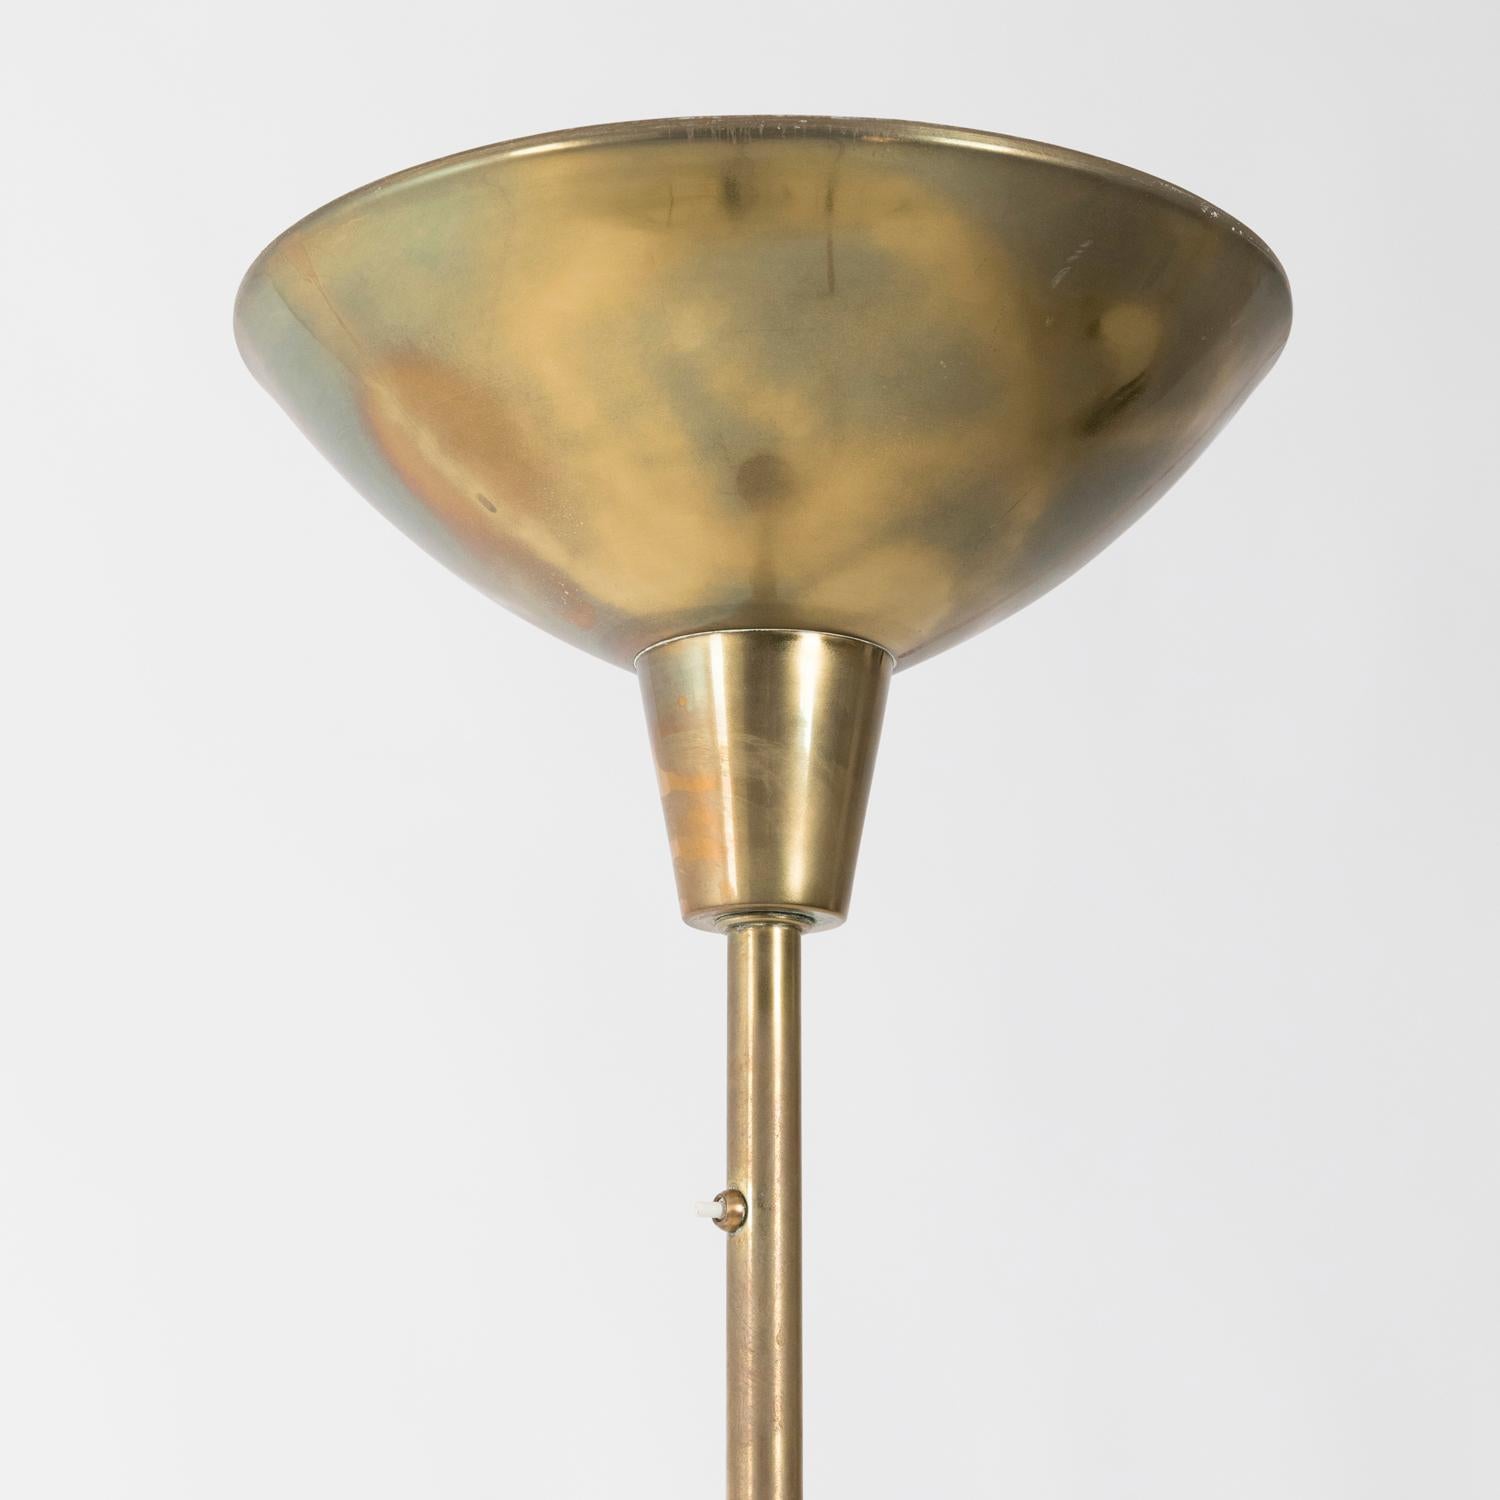 Brass floor lamp from the 1940s, possibly a prototype or a pre series model for the LTE1 lamp designed by Luigi Caccia Dominioni for Azucena in 1948. The lamp carries a high quality and some features which are identical to those present of the